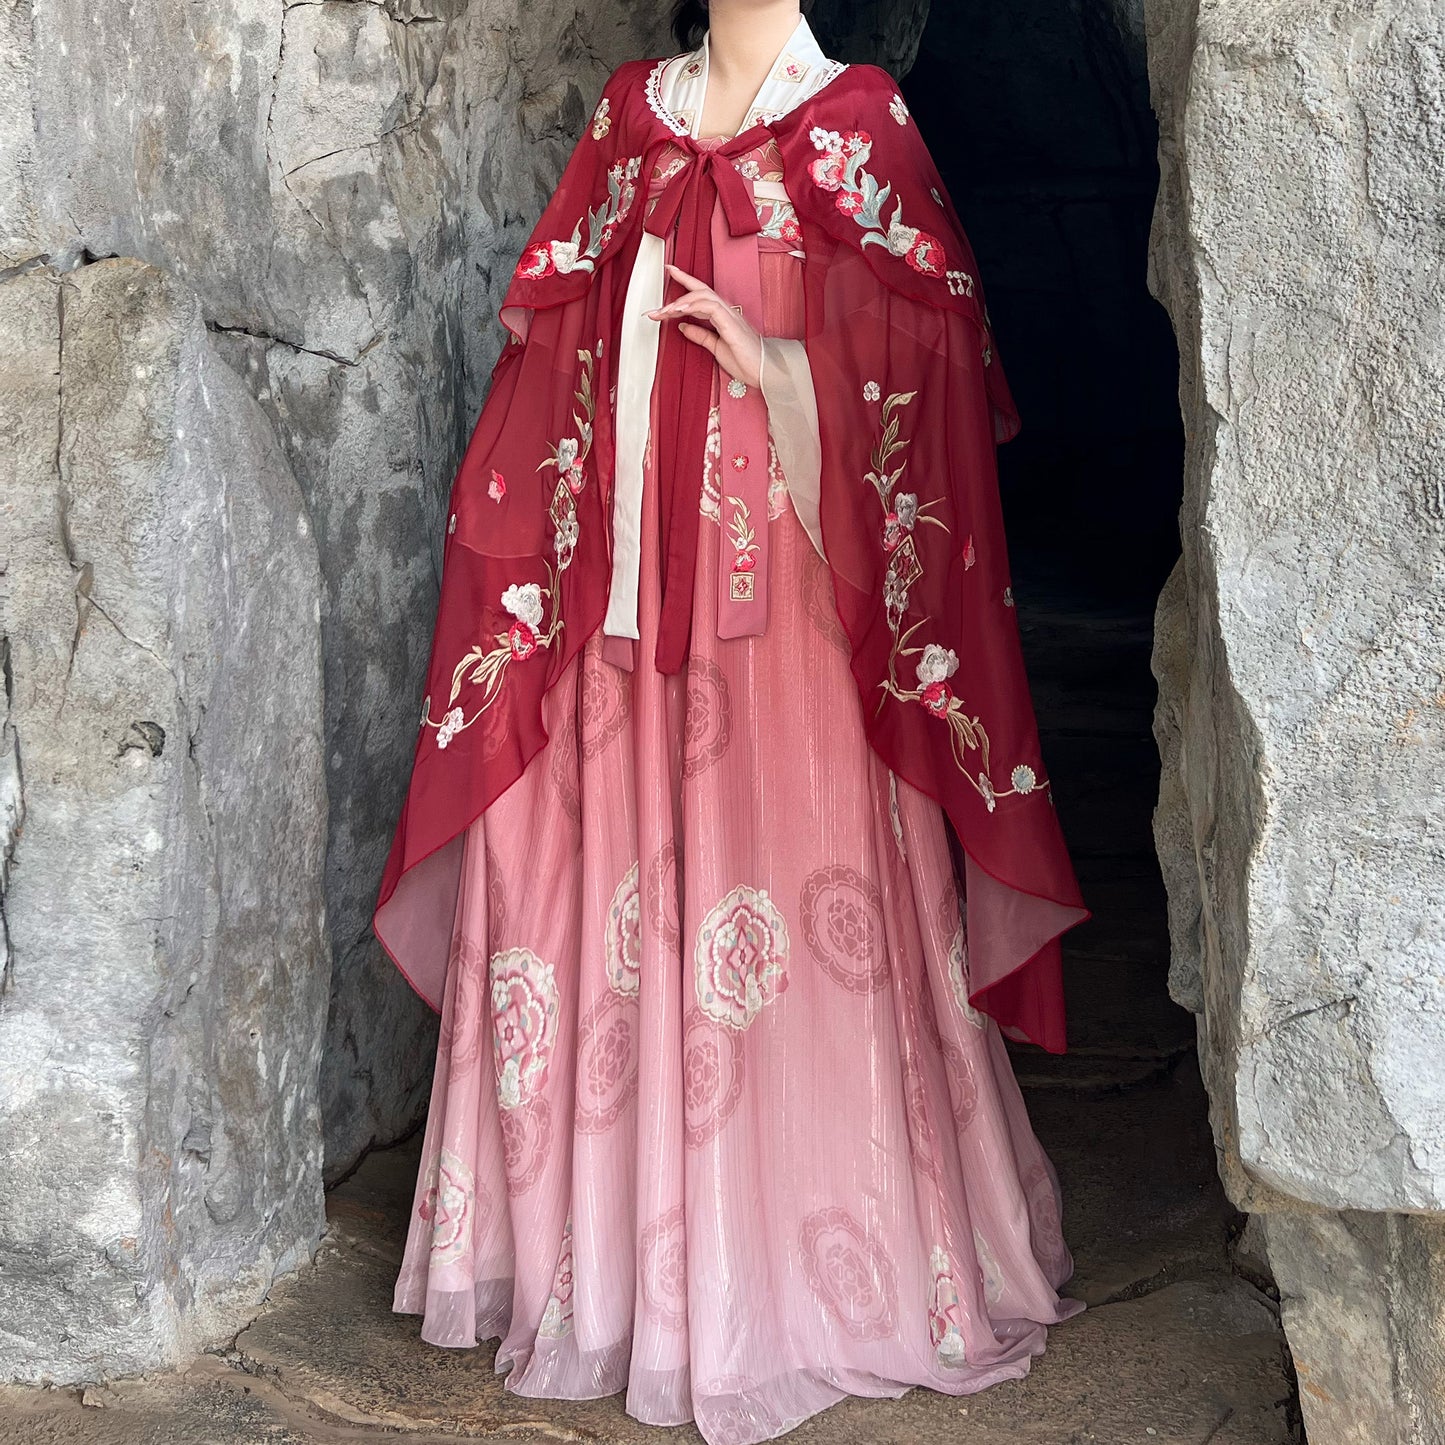 Rent-Blossom Elegance: Original Red Jade Blossom Tang Hanfu - Embroidered Split Skirt for Spring/Summer - Perfect for BFF Outings